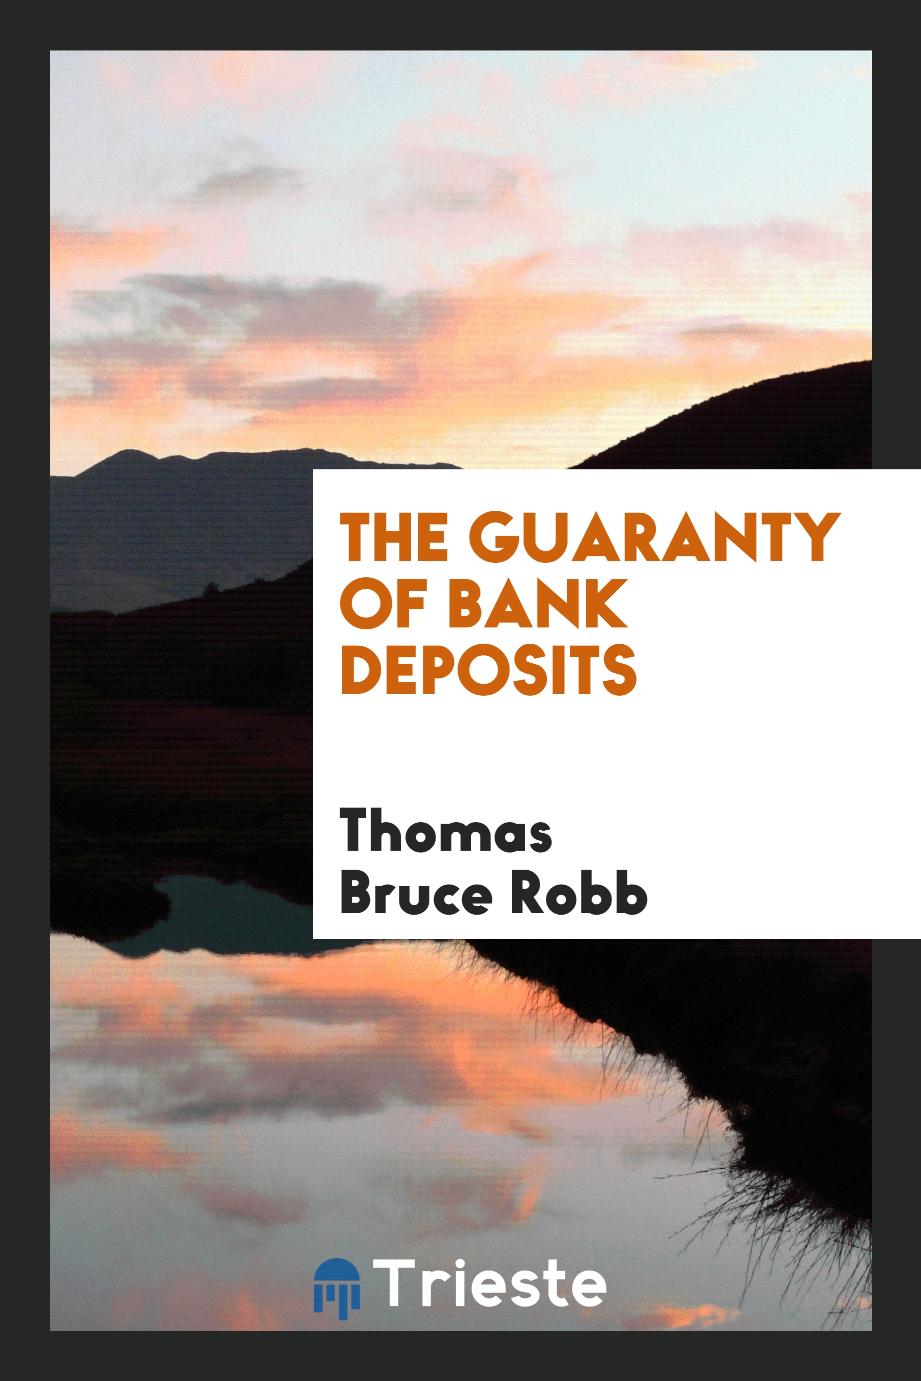 The guaranty of bank deposits